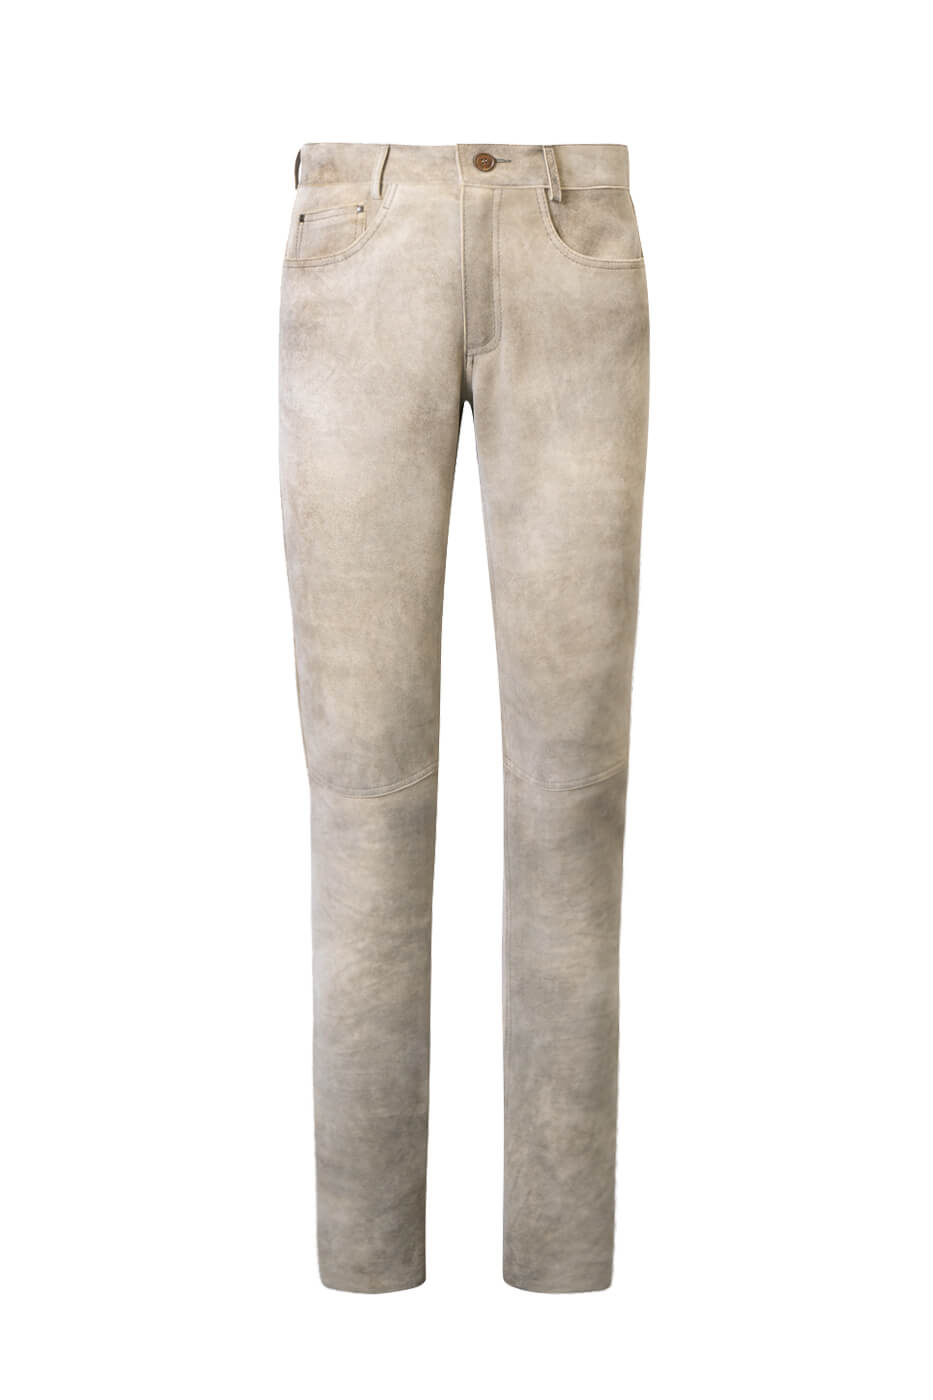 Deer Leather Trousers “Romeo”, glacier